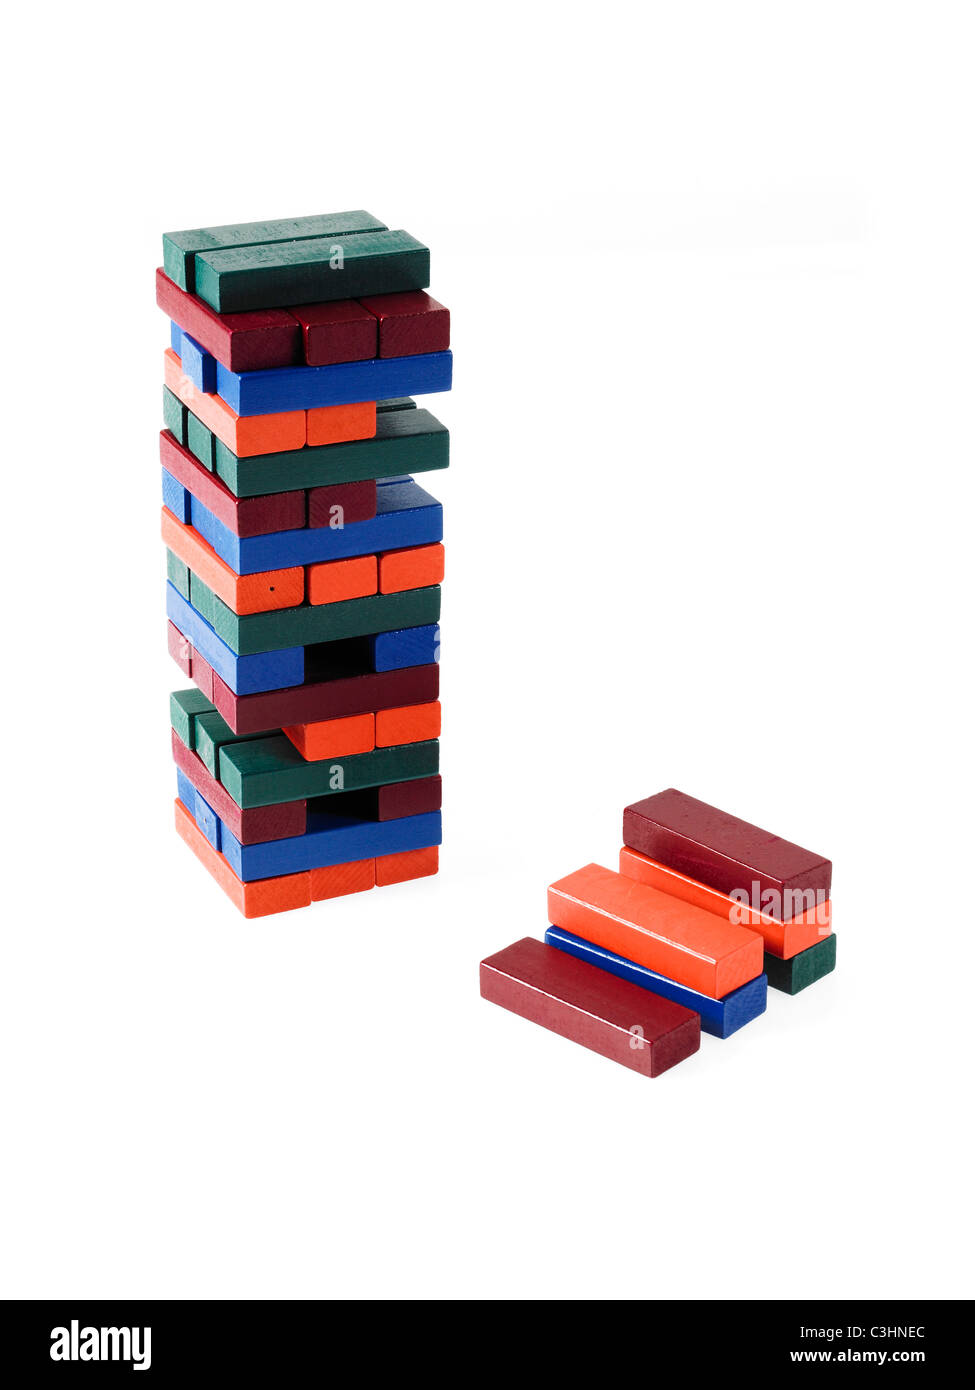 353 Adult Jenga Game Images, Stock Photos, 3D objects, & Vectors